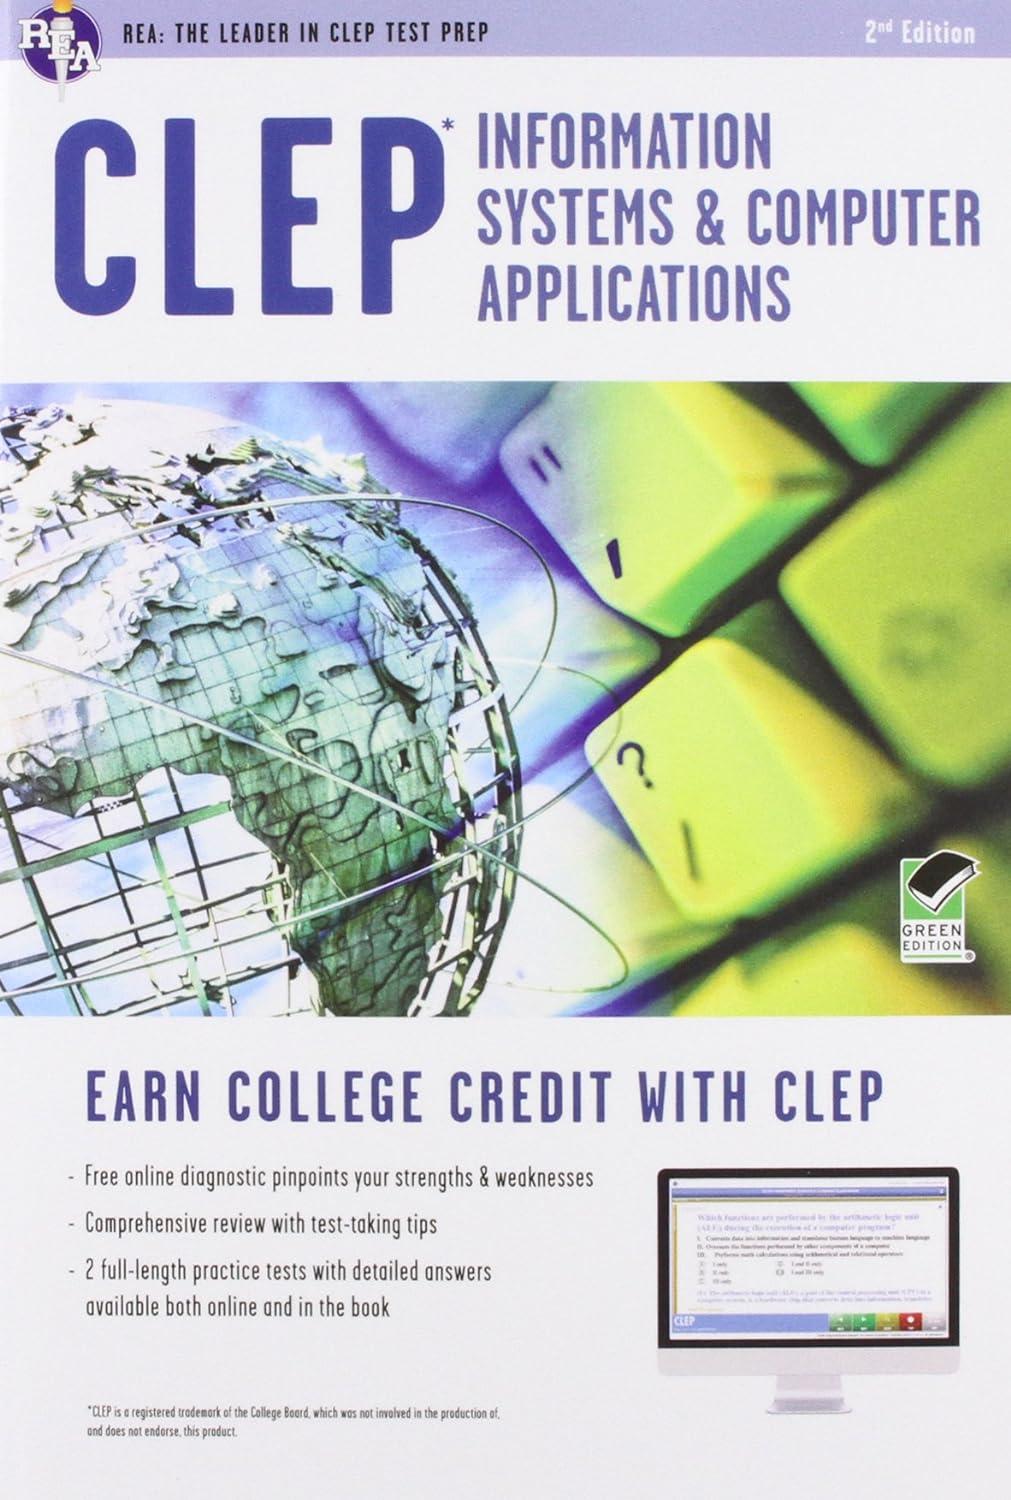 clep information systems and computer applications 2nd edition naresh dhanda 978-0738610368